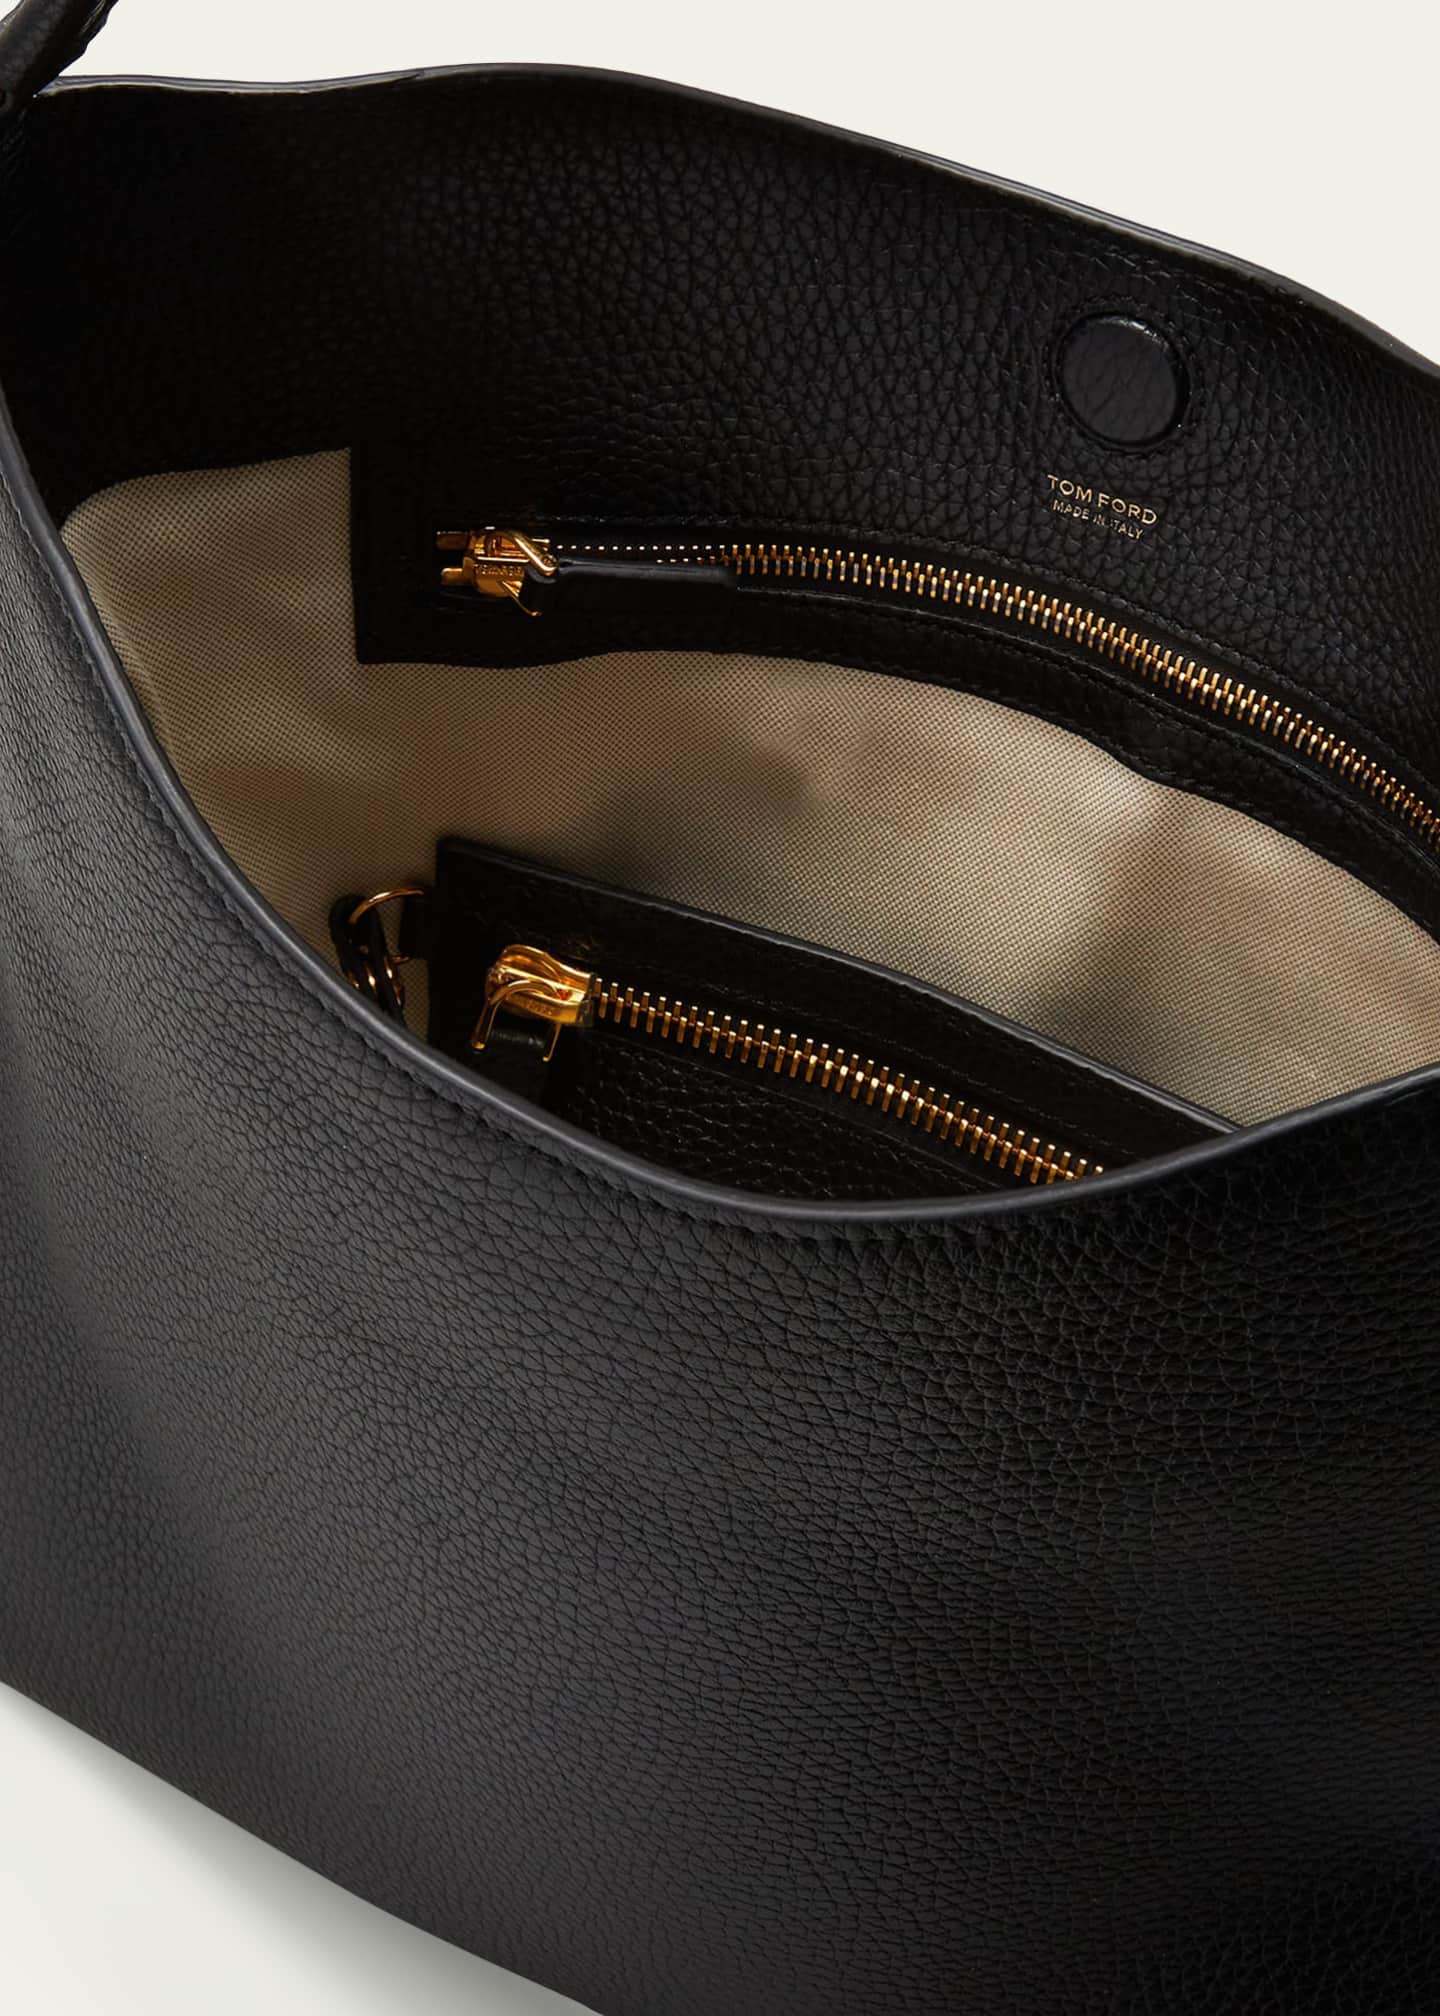 TOM FORD Alix Hobo Small in Grained Leather - Bergdorf Goodman